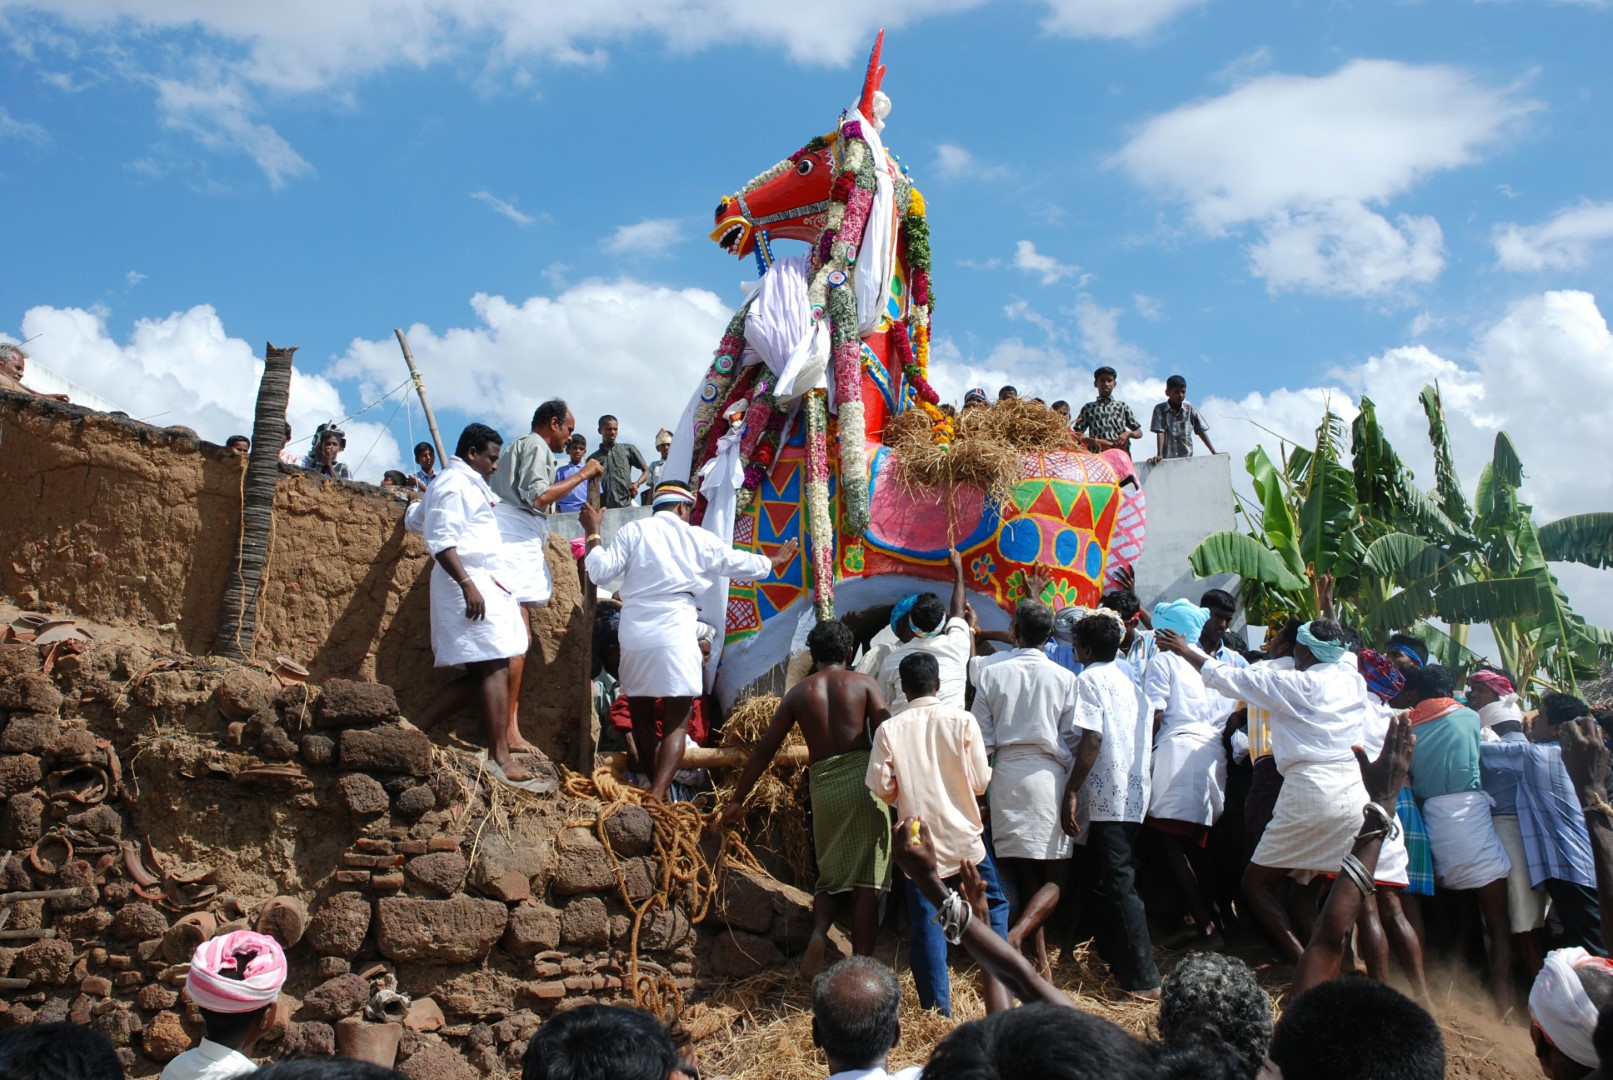 <span style="font-weight:normal;">The gigantic horse-offering for the Kuthadivayal festival being taken out of the oven in the potters' quarters in Aranthangi by more than one hundred devotees.</span>